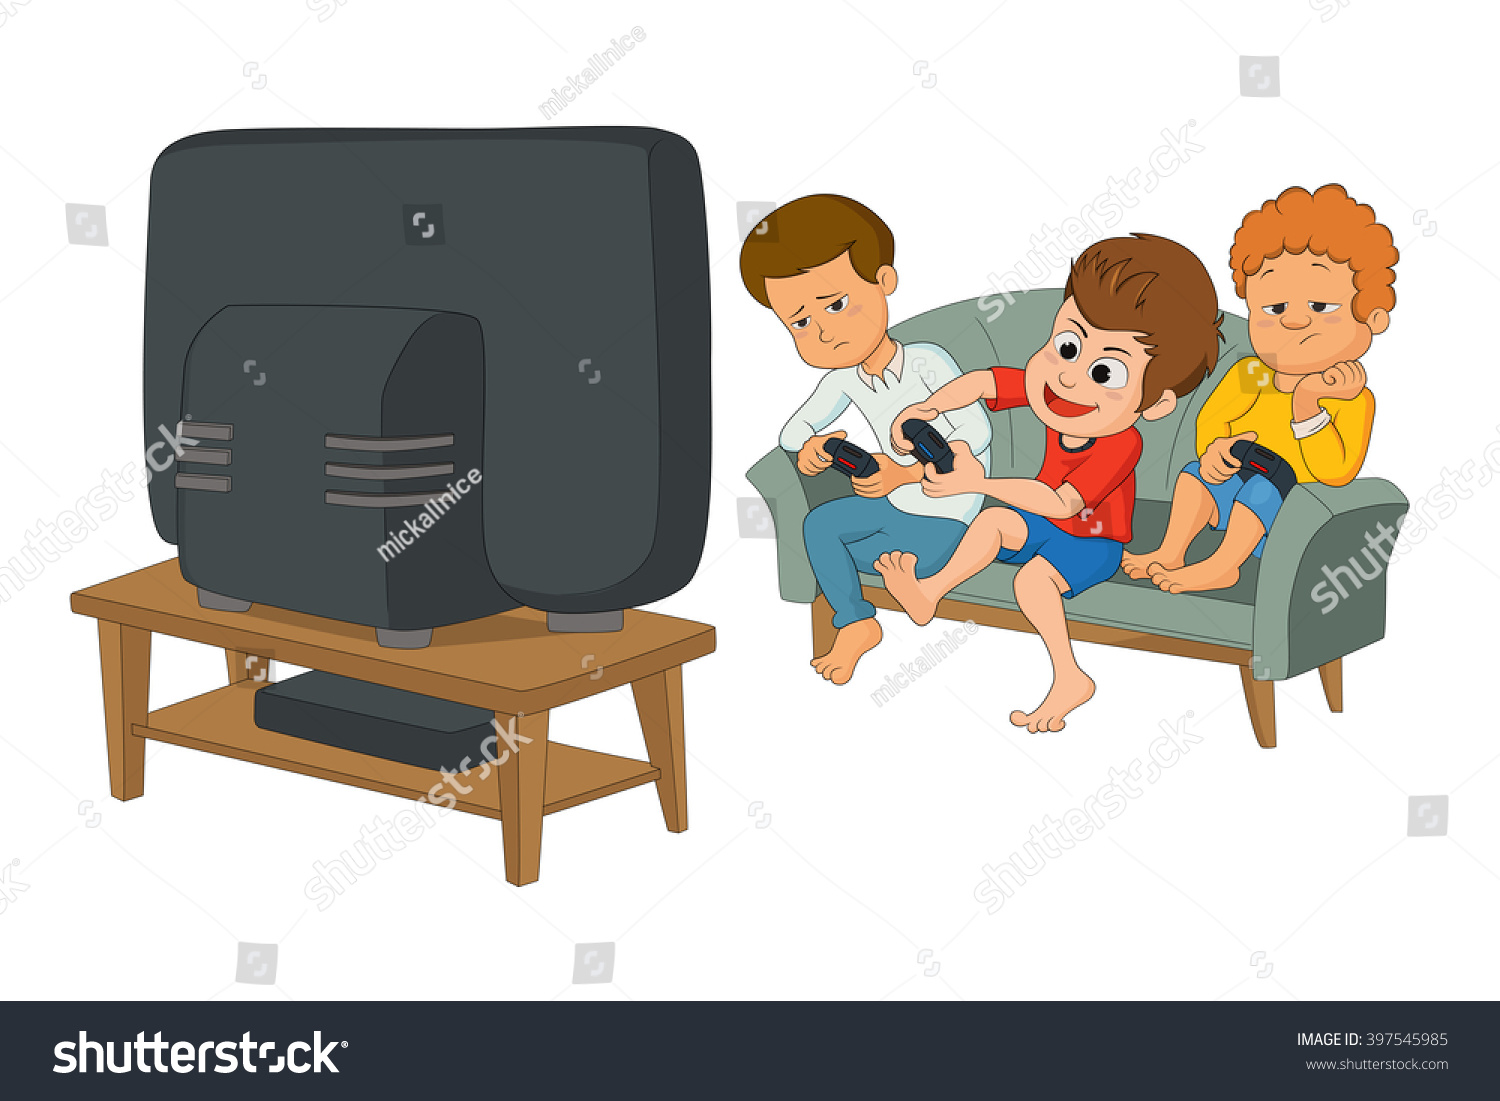 child playing video games clipart - photo #42